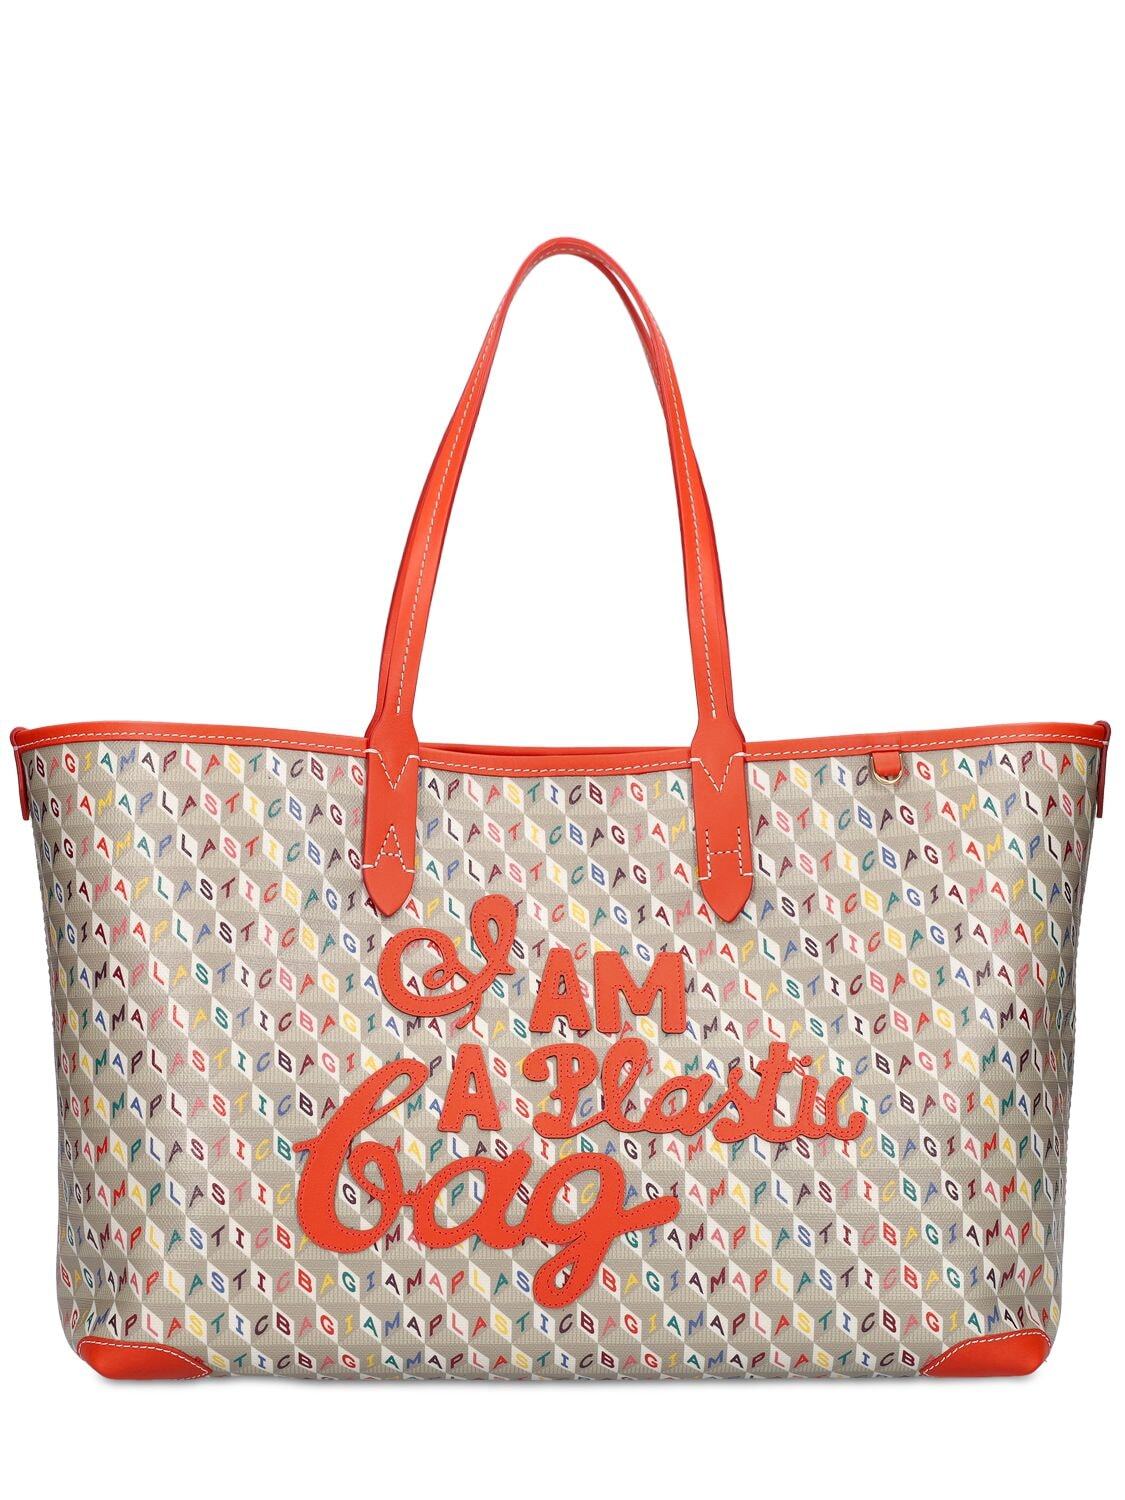 ANYA HINDMARCH Sm I Am A Plastic Bag Recycled Tote in multi